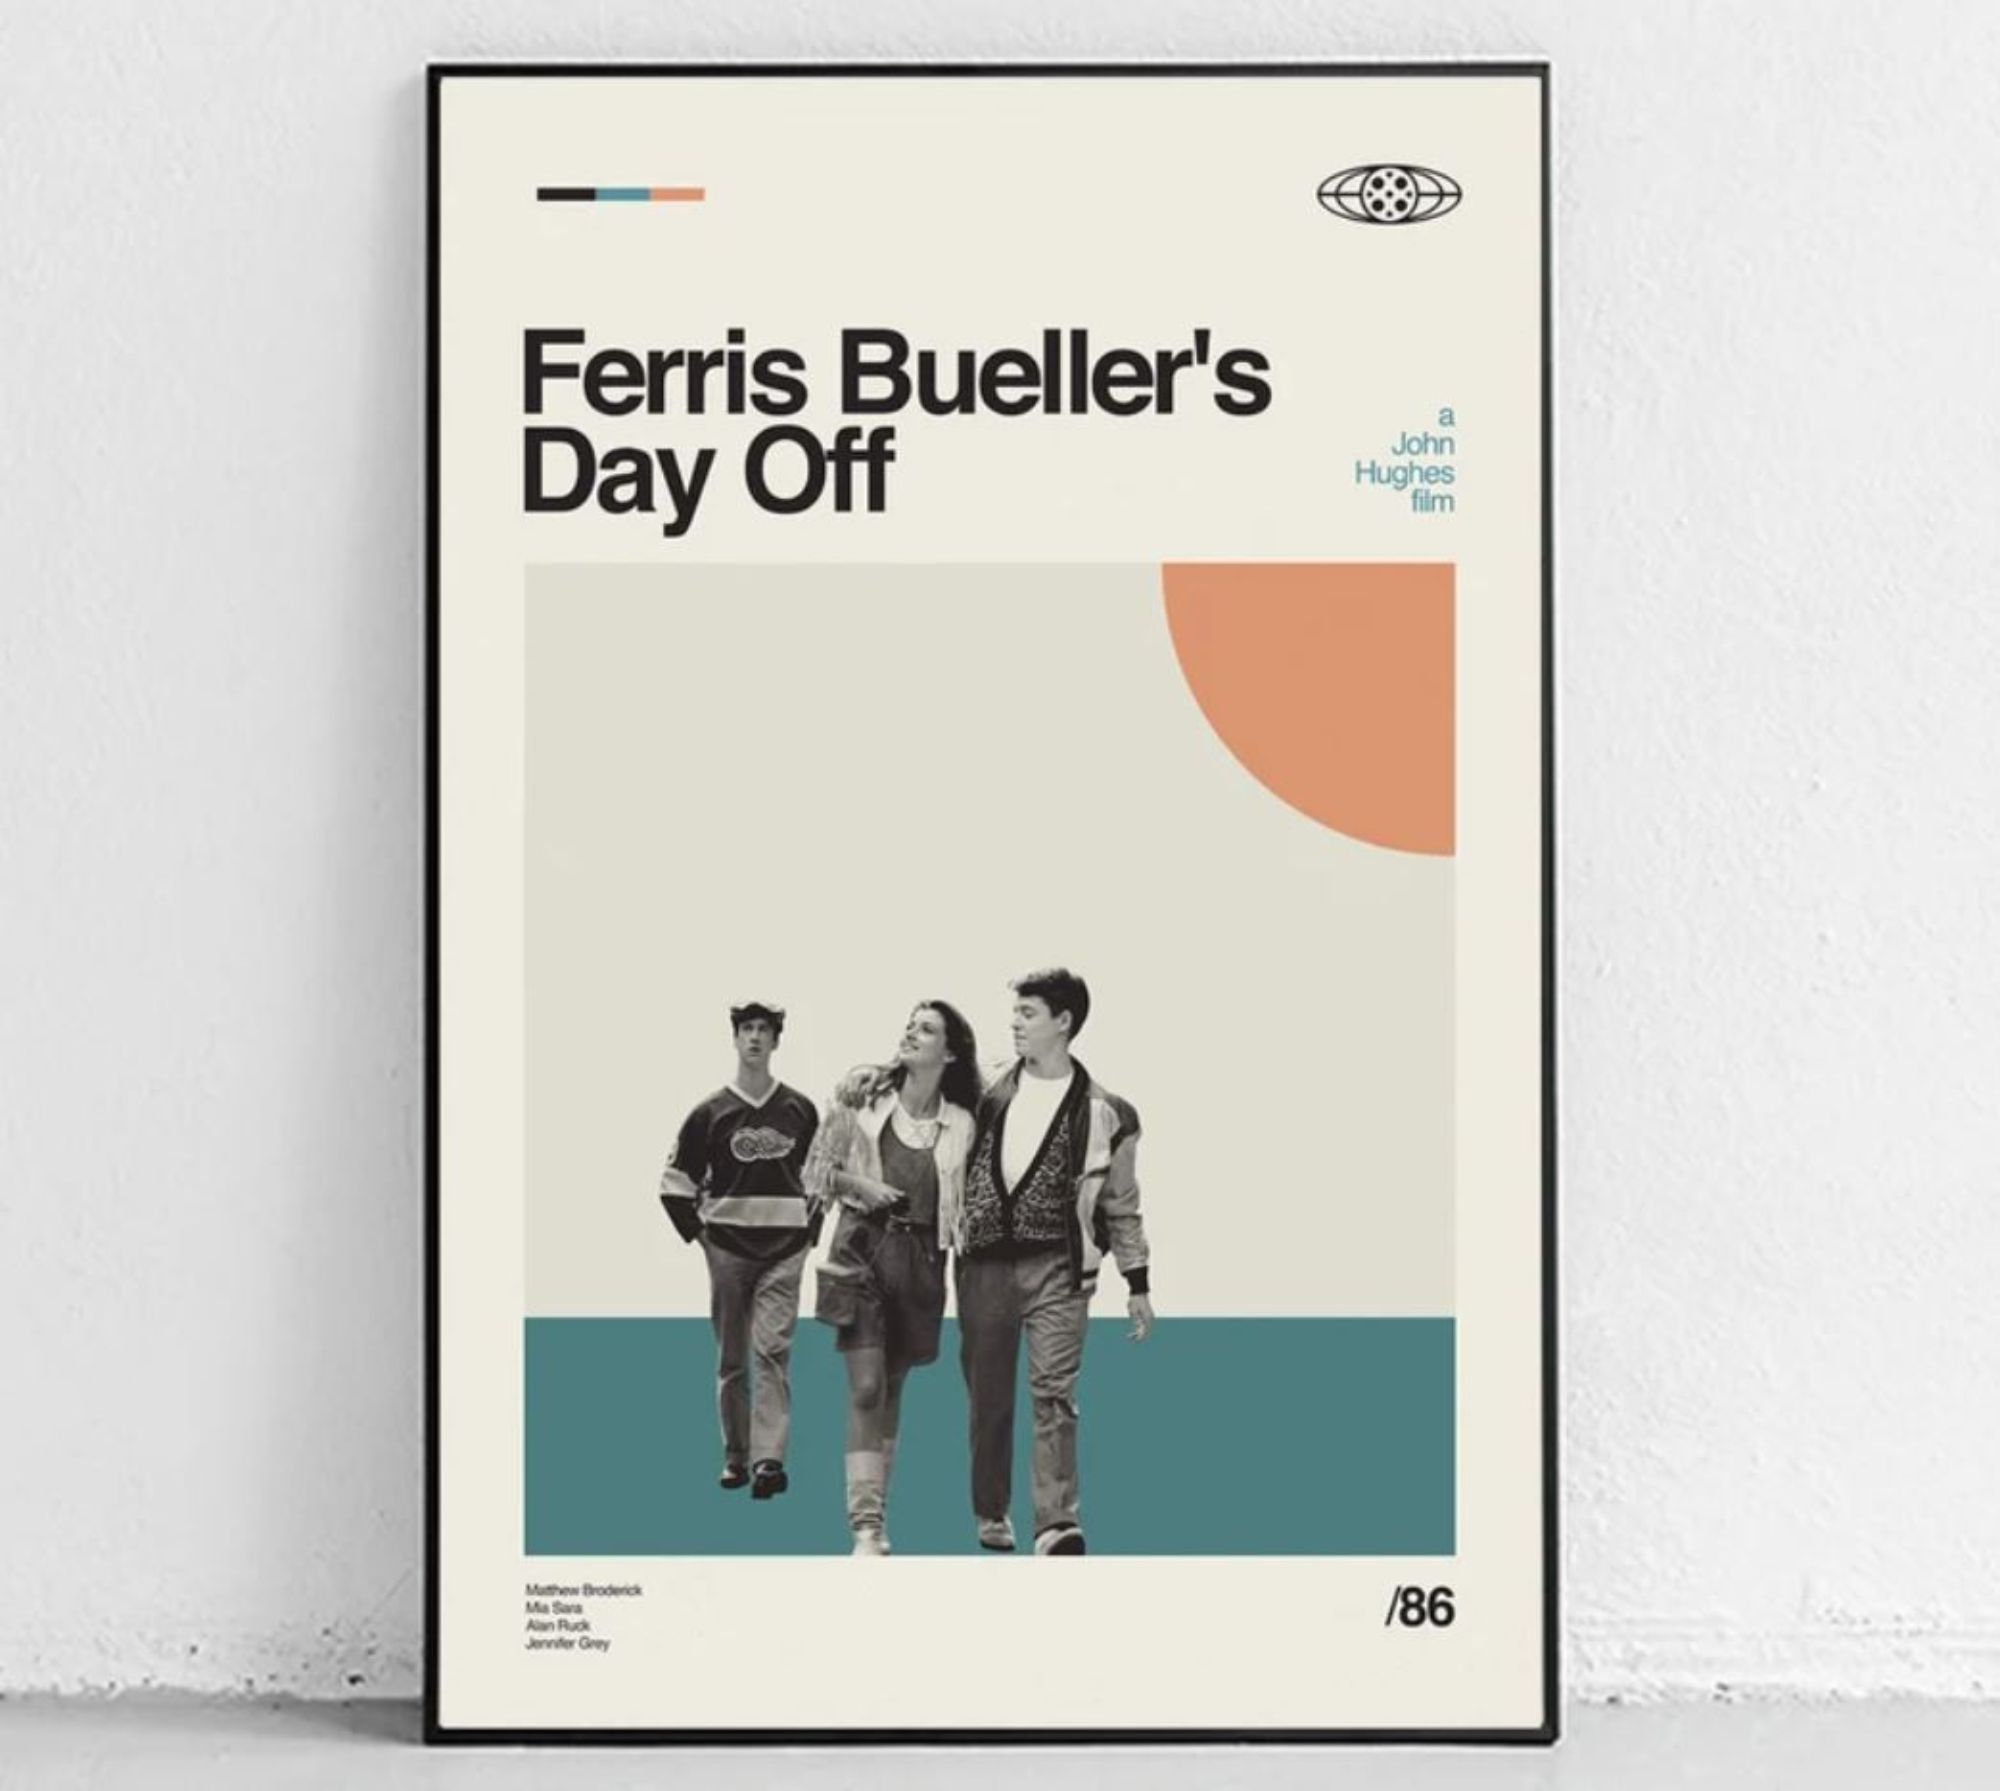 Discover Ferris Bueller's Day Off - midcentury modern Poster - movie poster